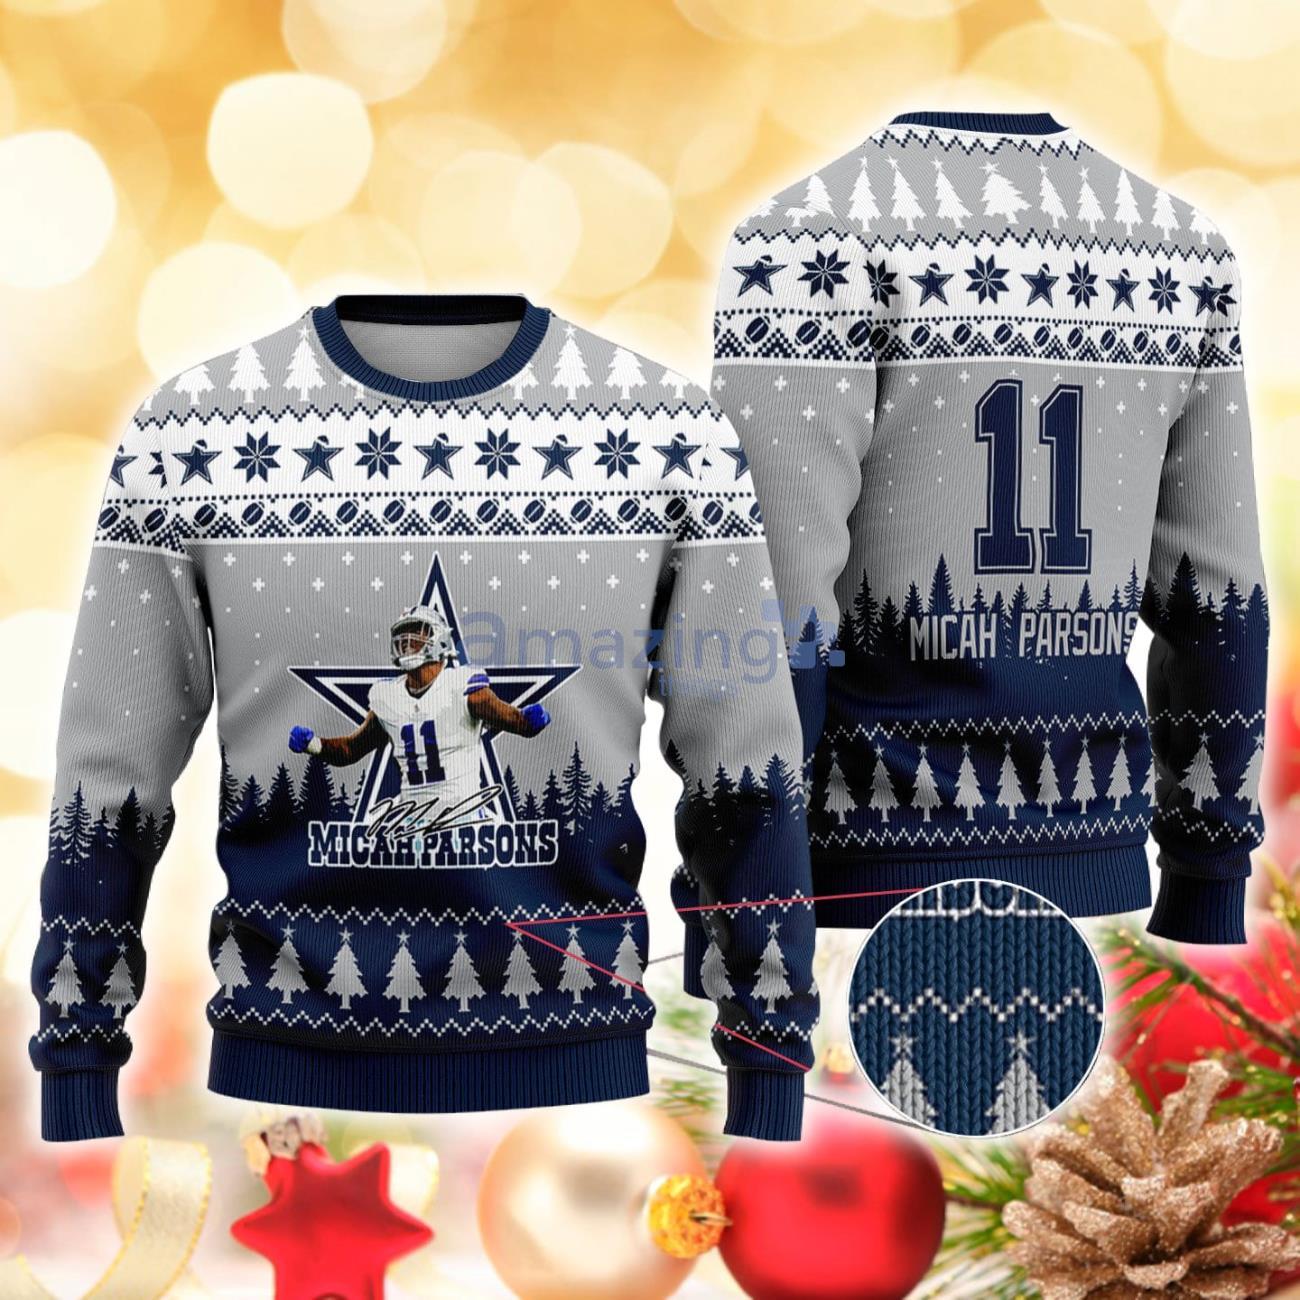 micah parsons christmas sweater